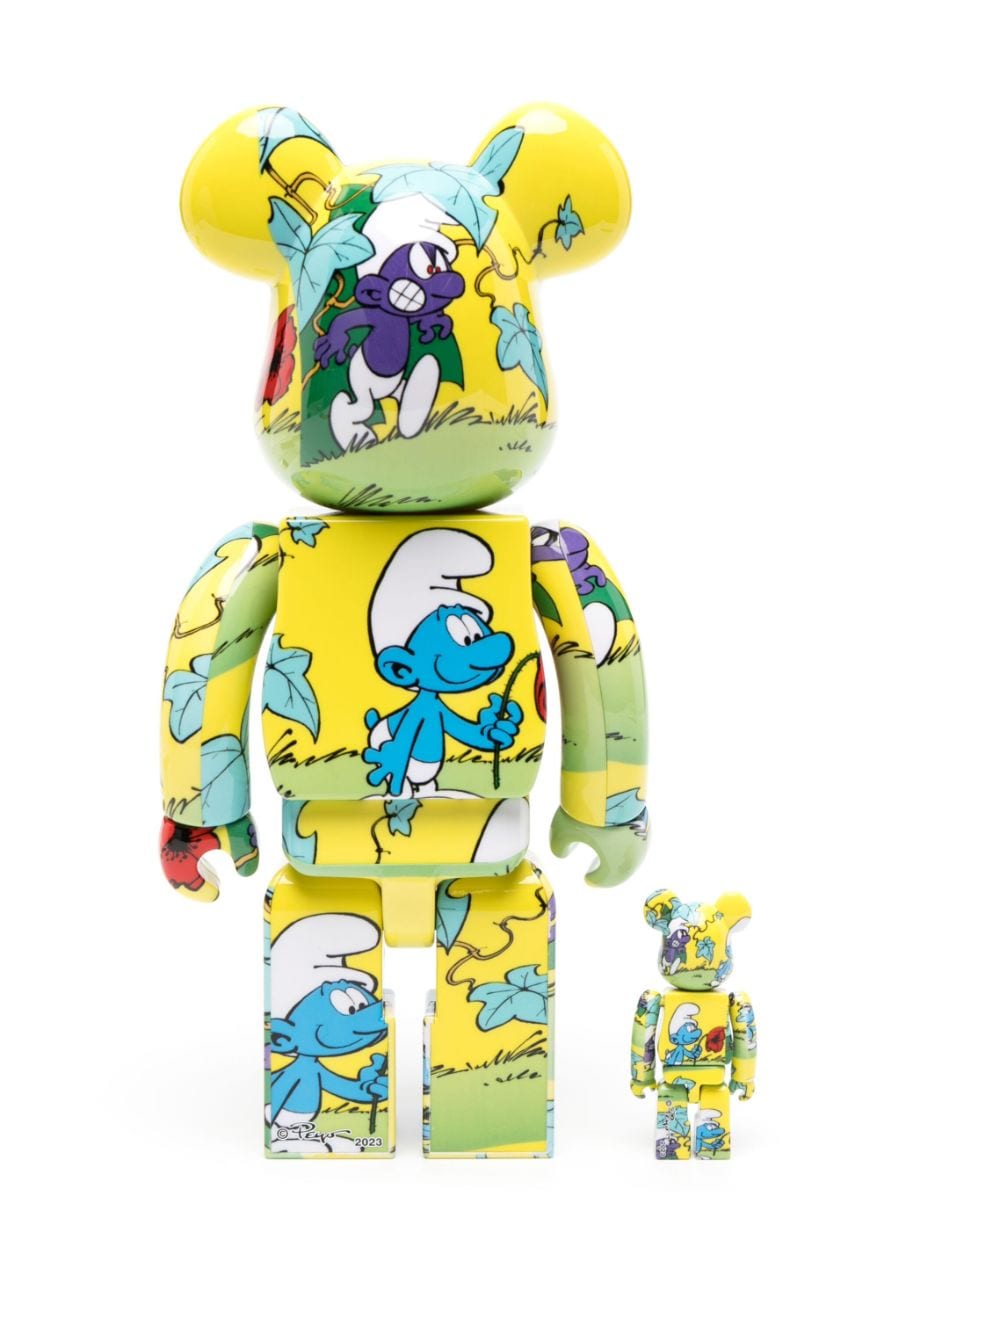 Medicom Toy x The Smurfs Be@rbrick 100% and 400% figure set - Geel